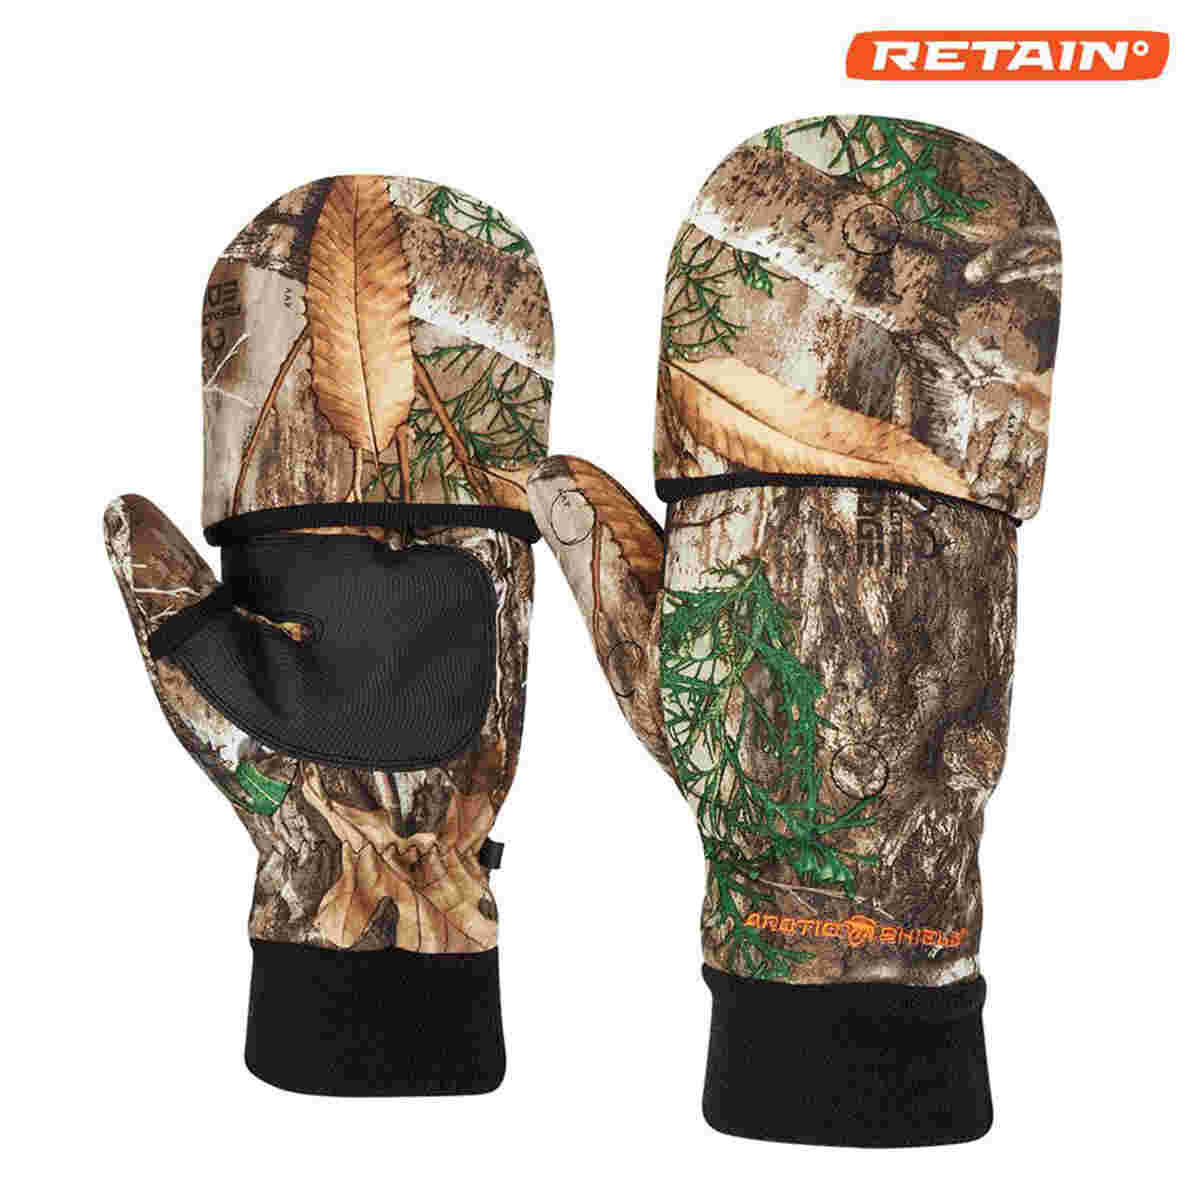 SYSTEM GLOVES WITH TECH FINGERS - REALTREE EDGE® | ArcticShield